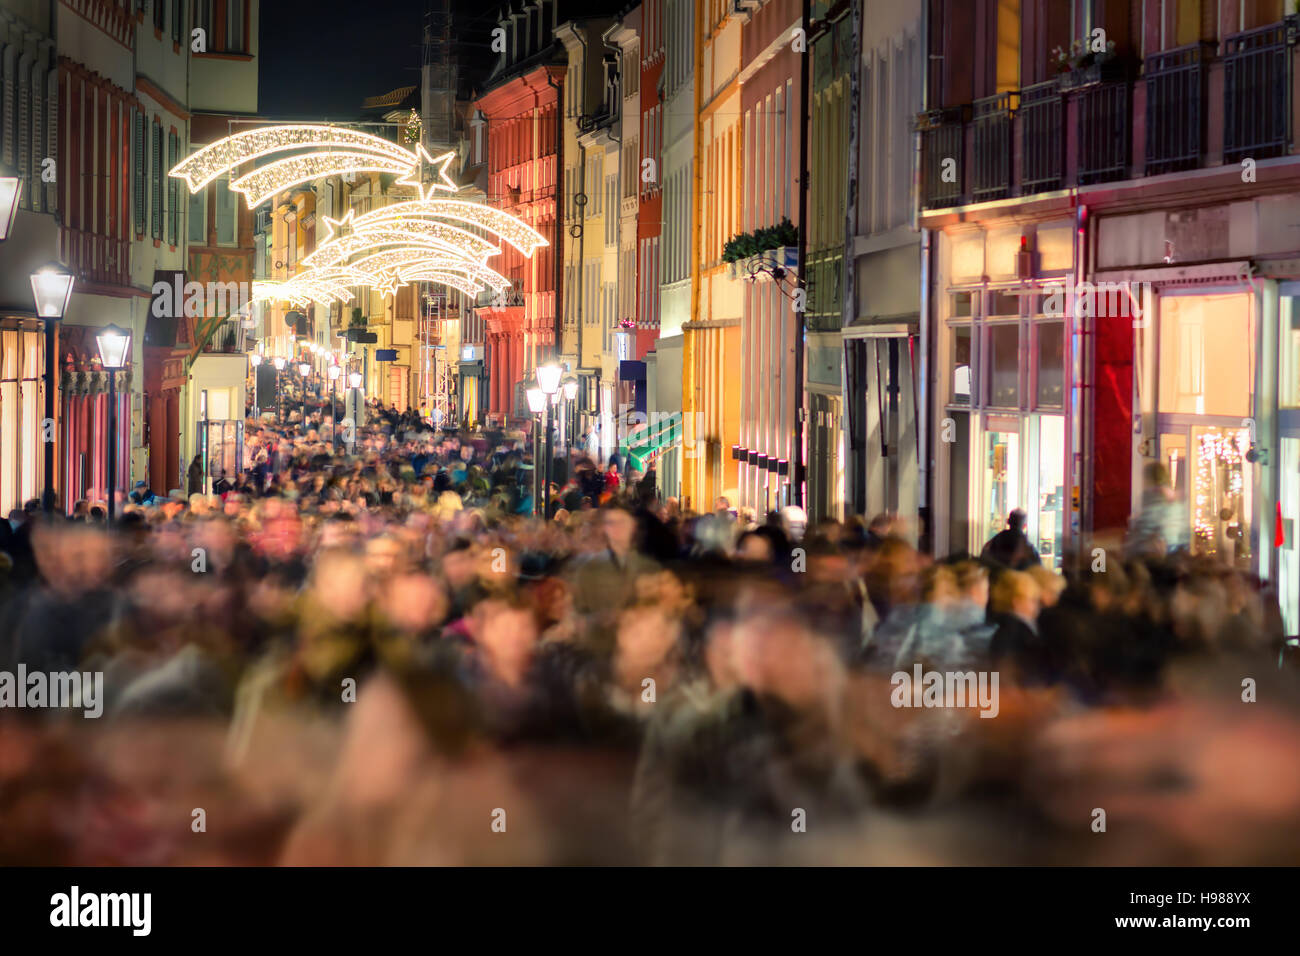 Large crowd of people hustling and shopping in a pedestrian area in Heidelberg, Germany, for Christmas Stock Photo